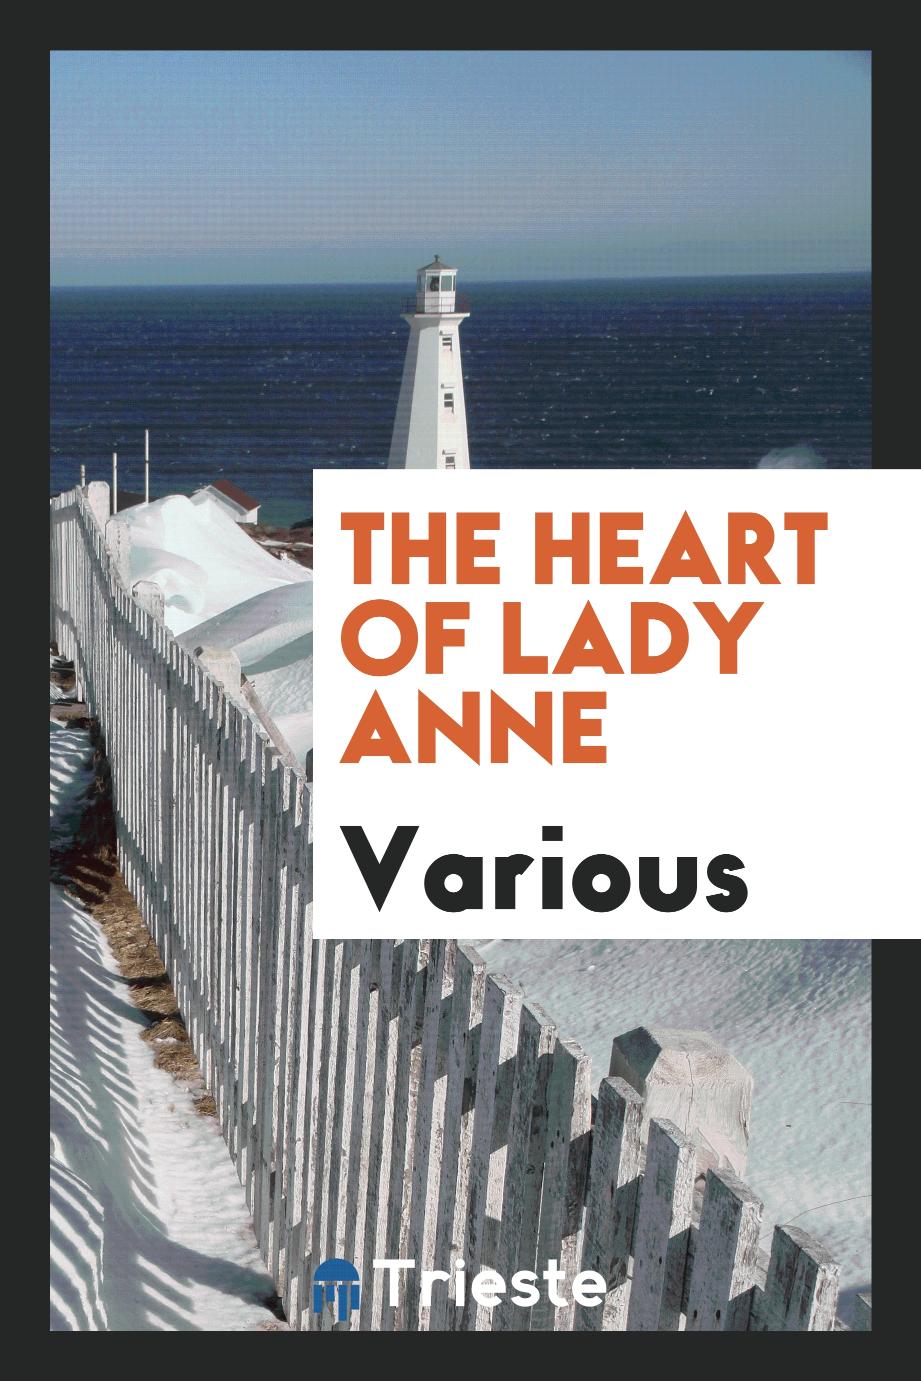 The heart of Lady Anne